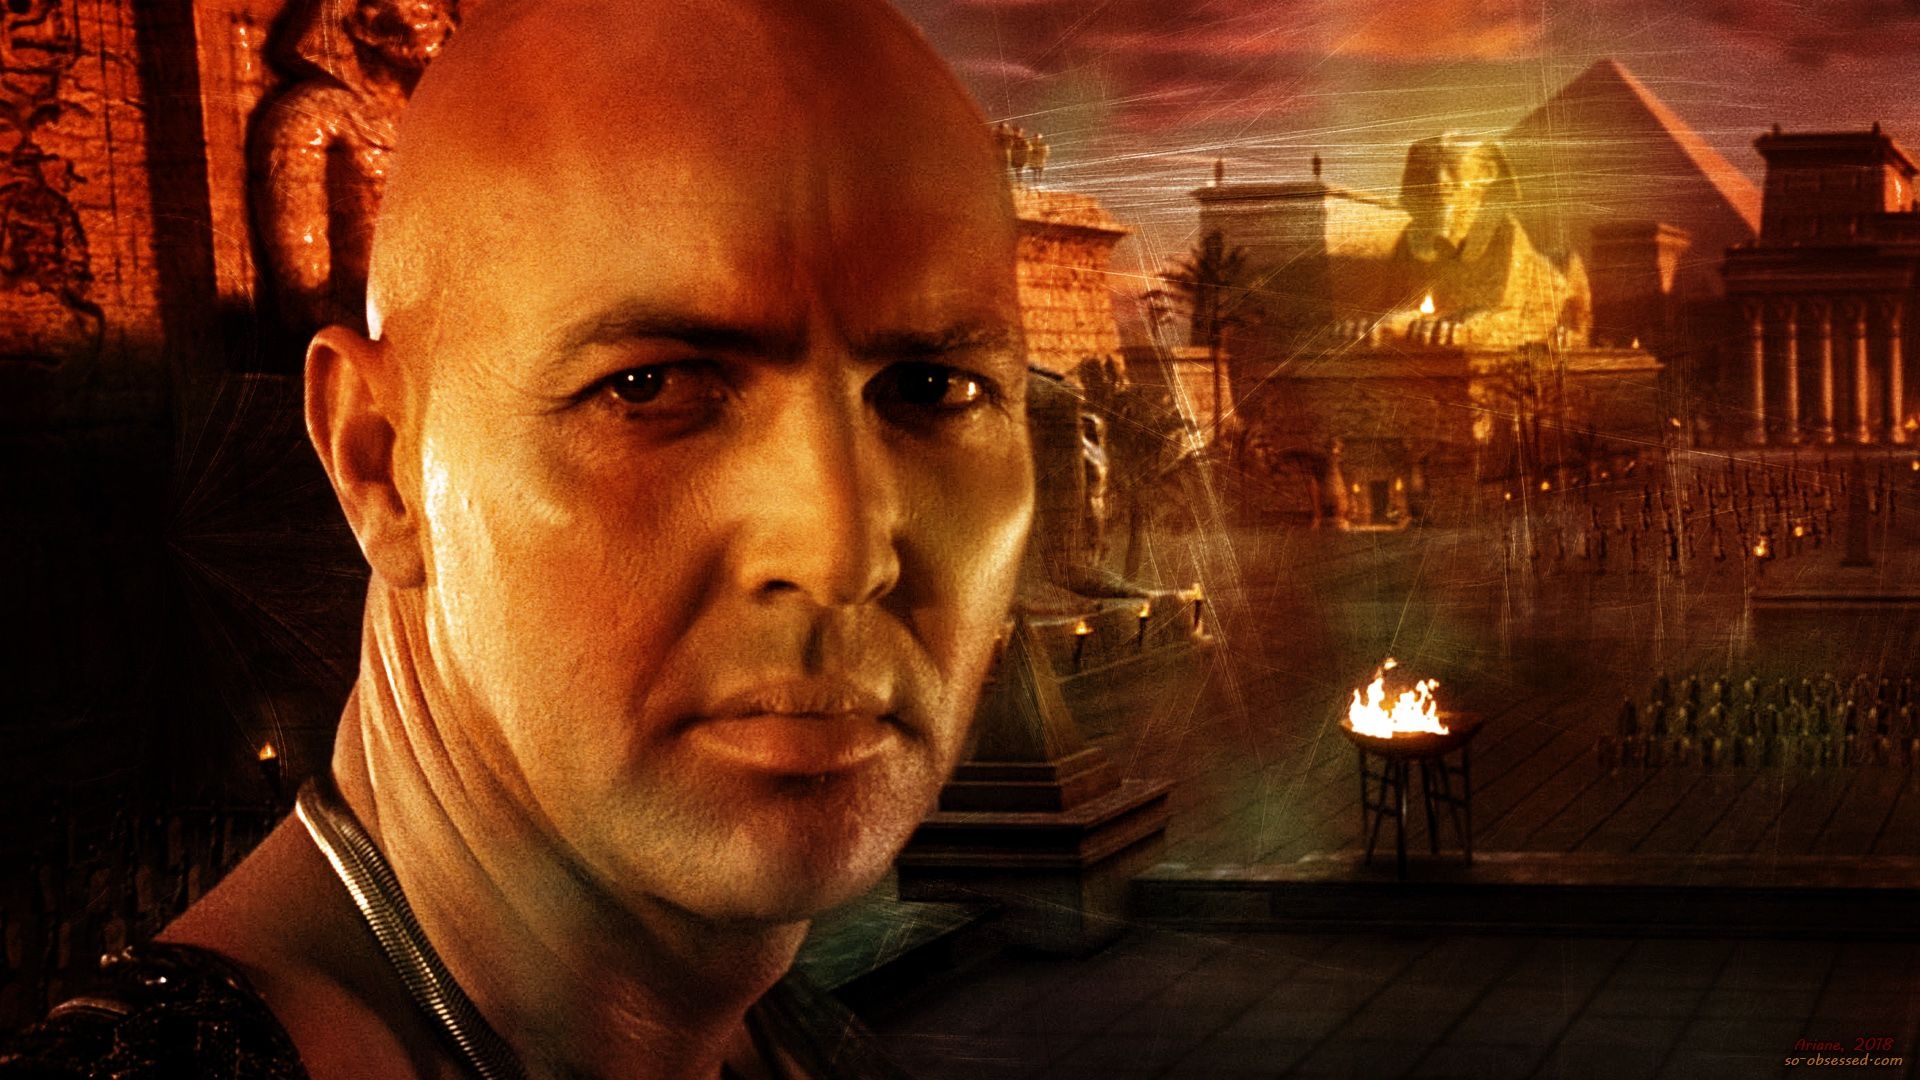 The Mummy, Imhotep, Arnold Vosloo, Lost Girl, Ancient evil, 1920x1080 Full HD Desktop